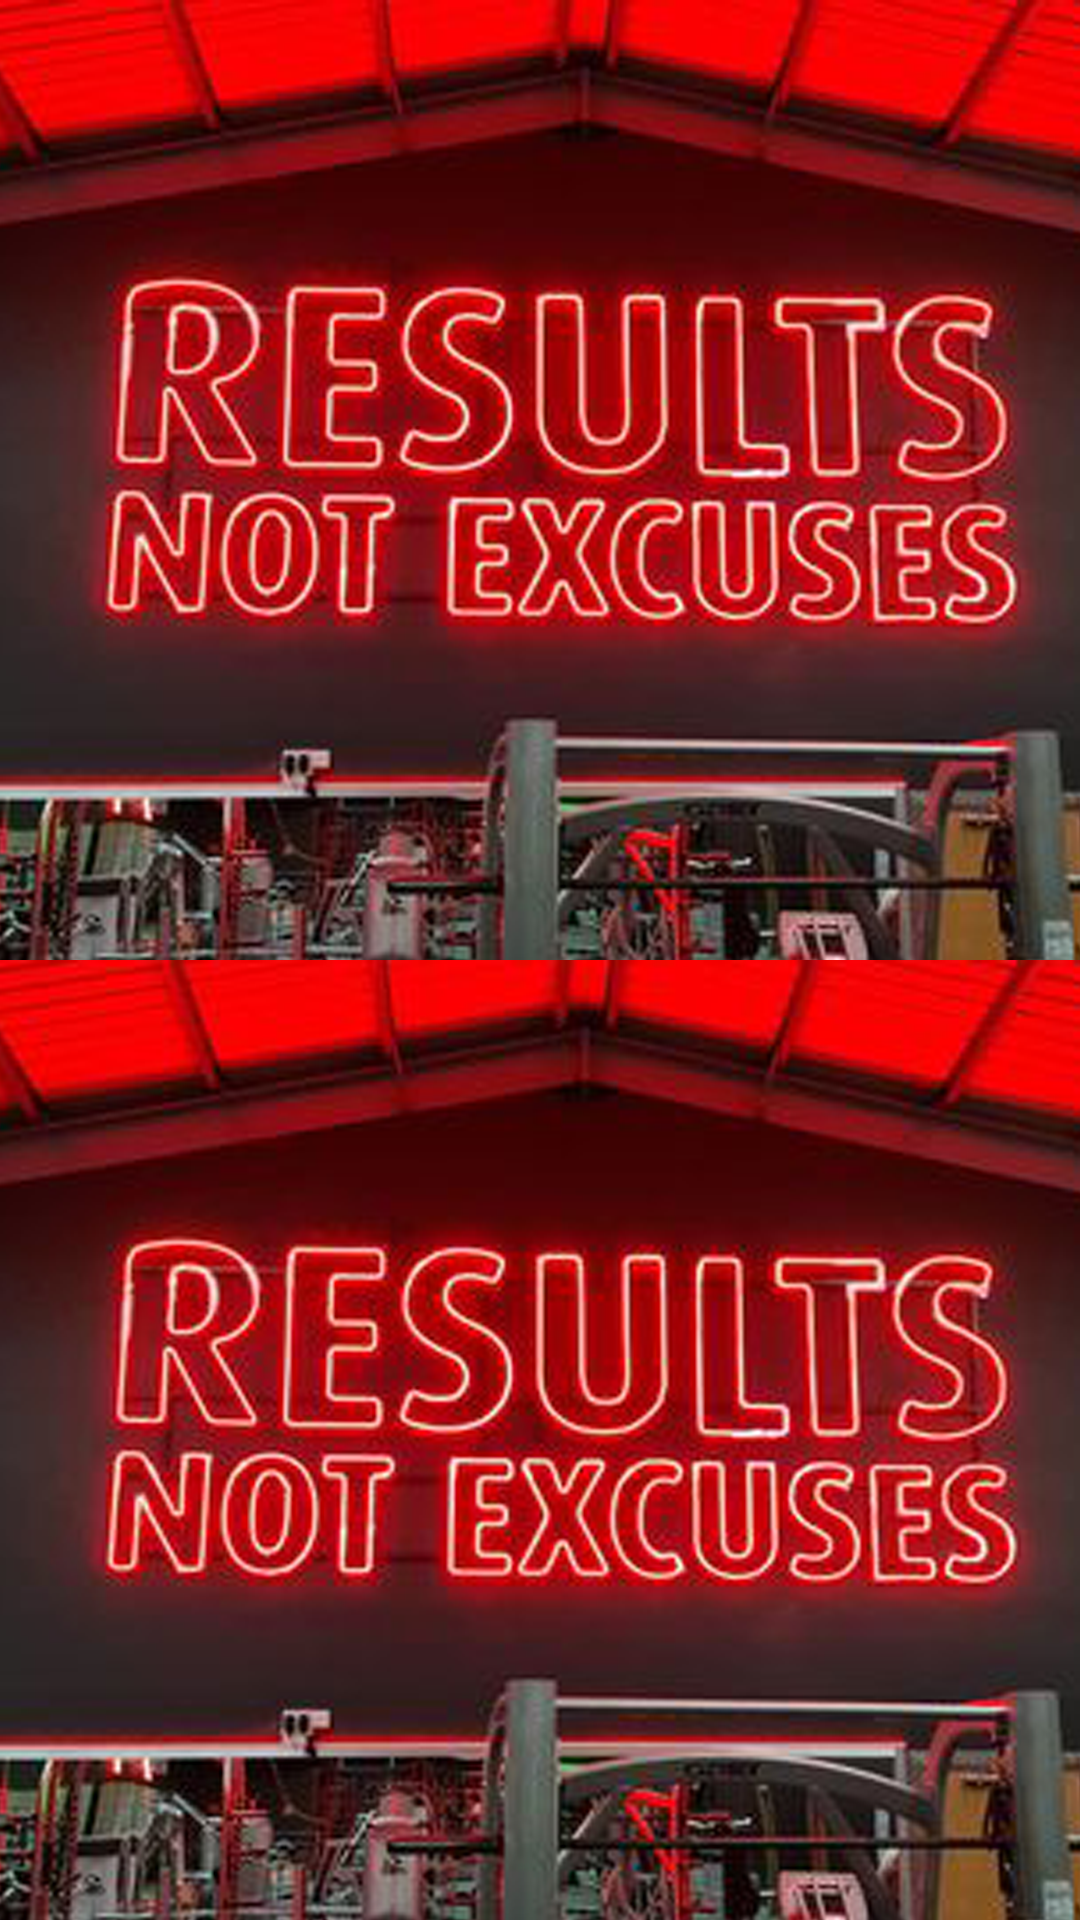 ellis-signs-results-not-excuses-newcastle-gateshead-north-east